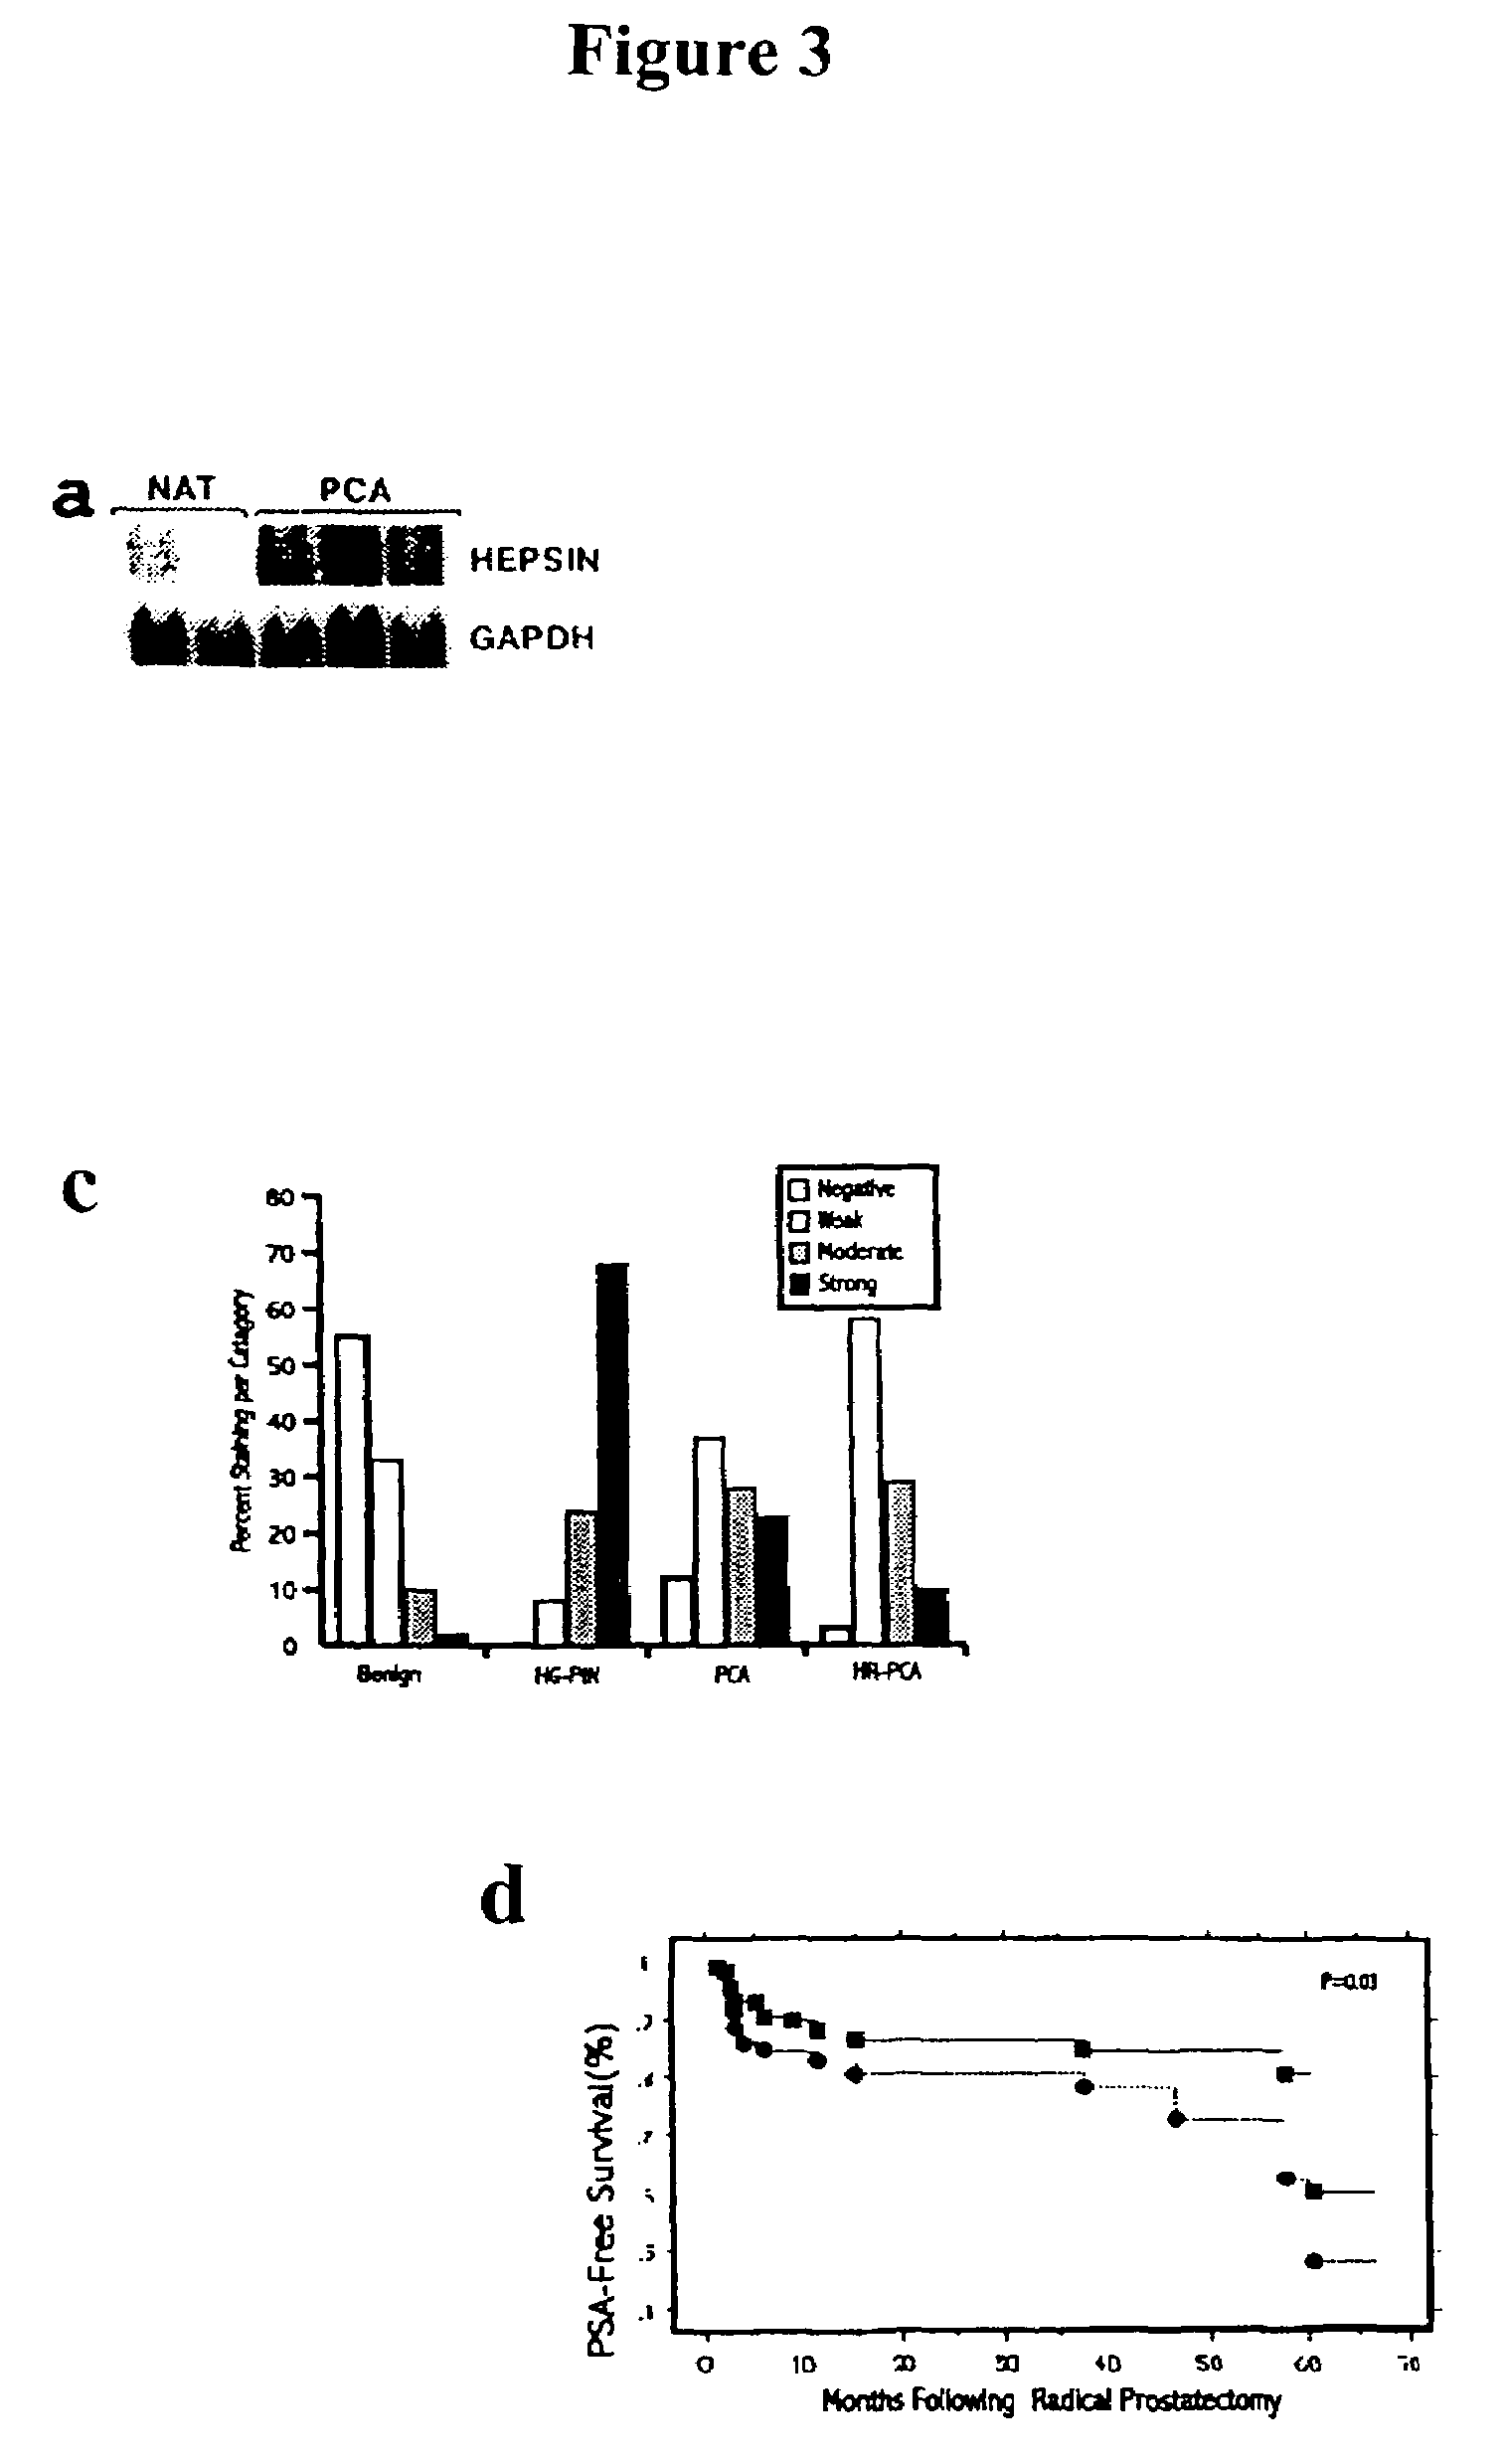 Dectection of AMACR cancer markers in urine